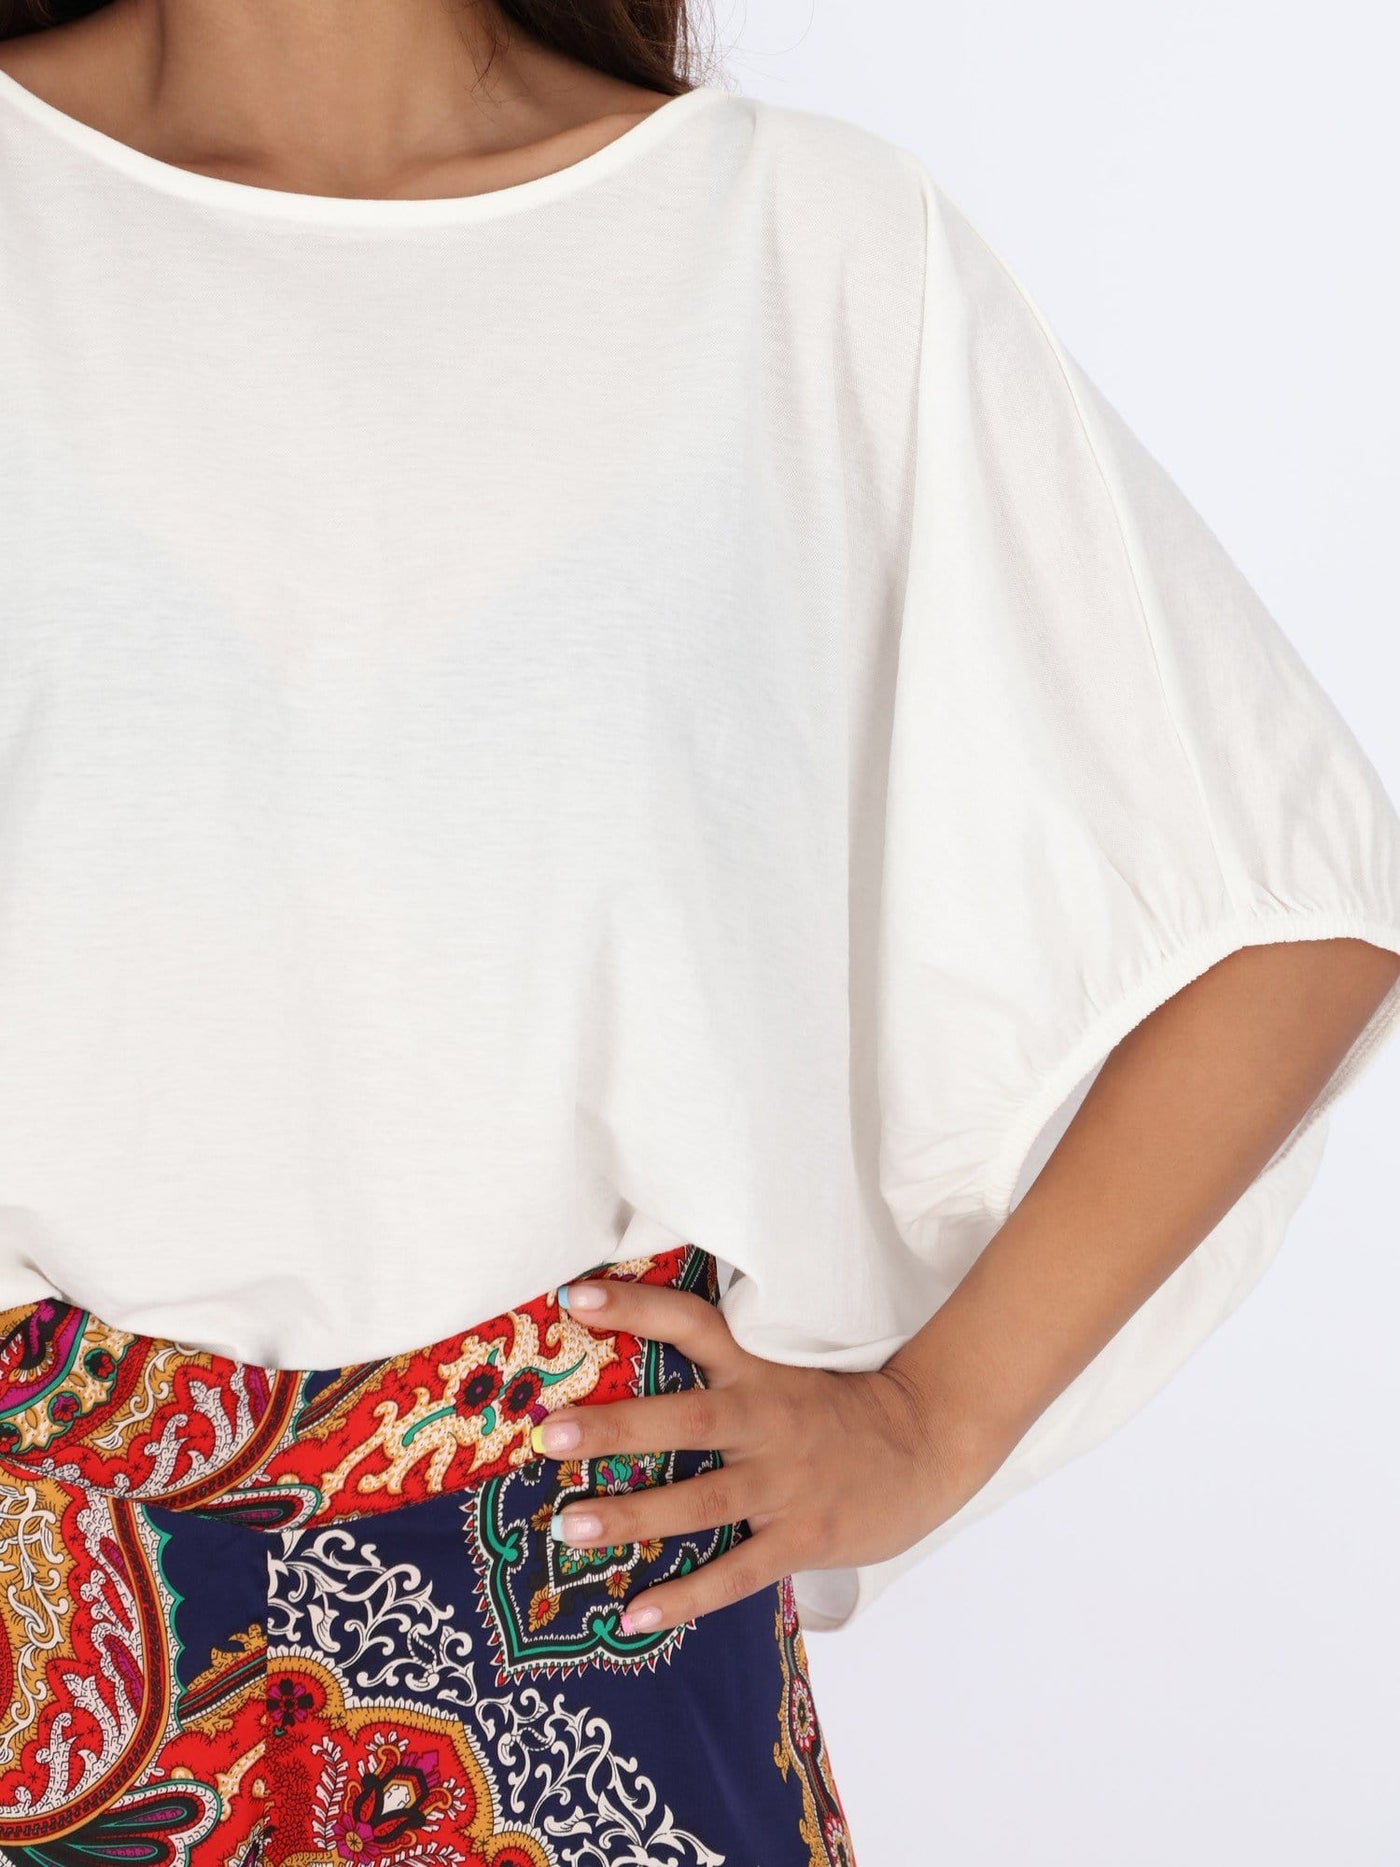 OR Tops & Blouses Batwing Loose Top